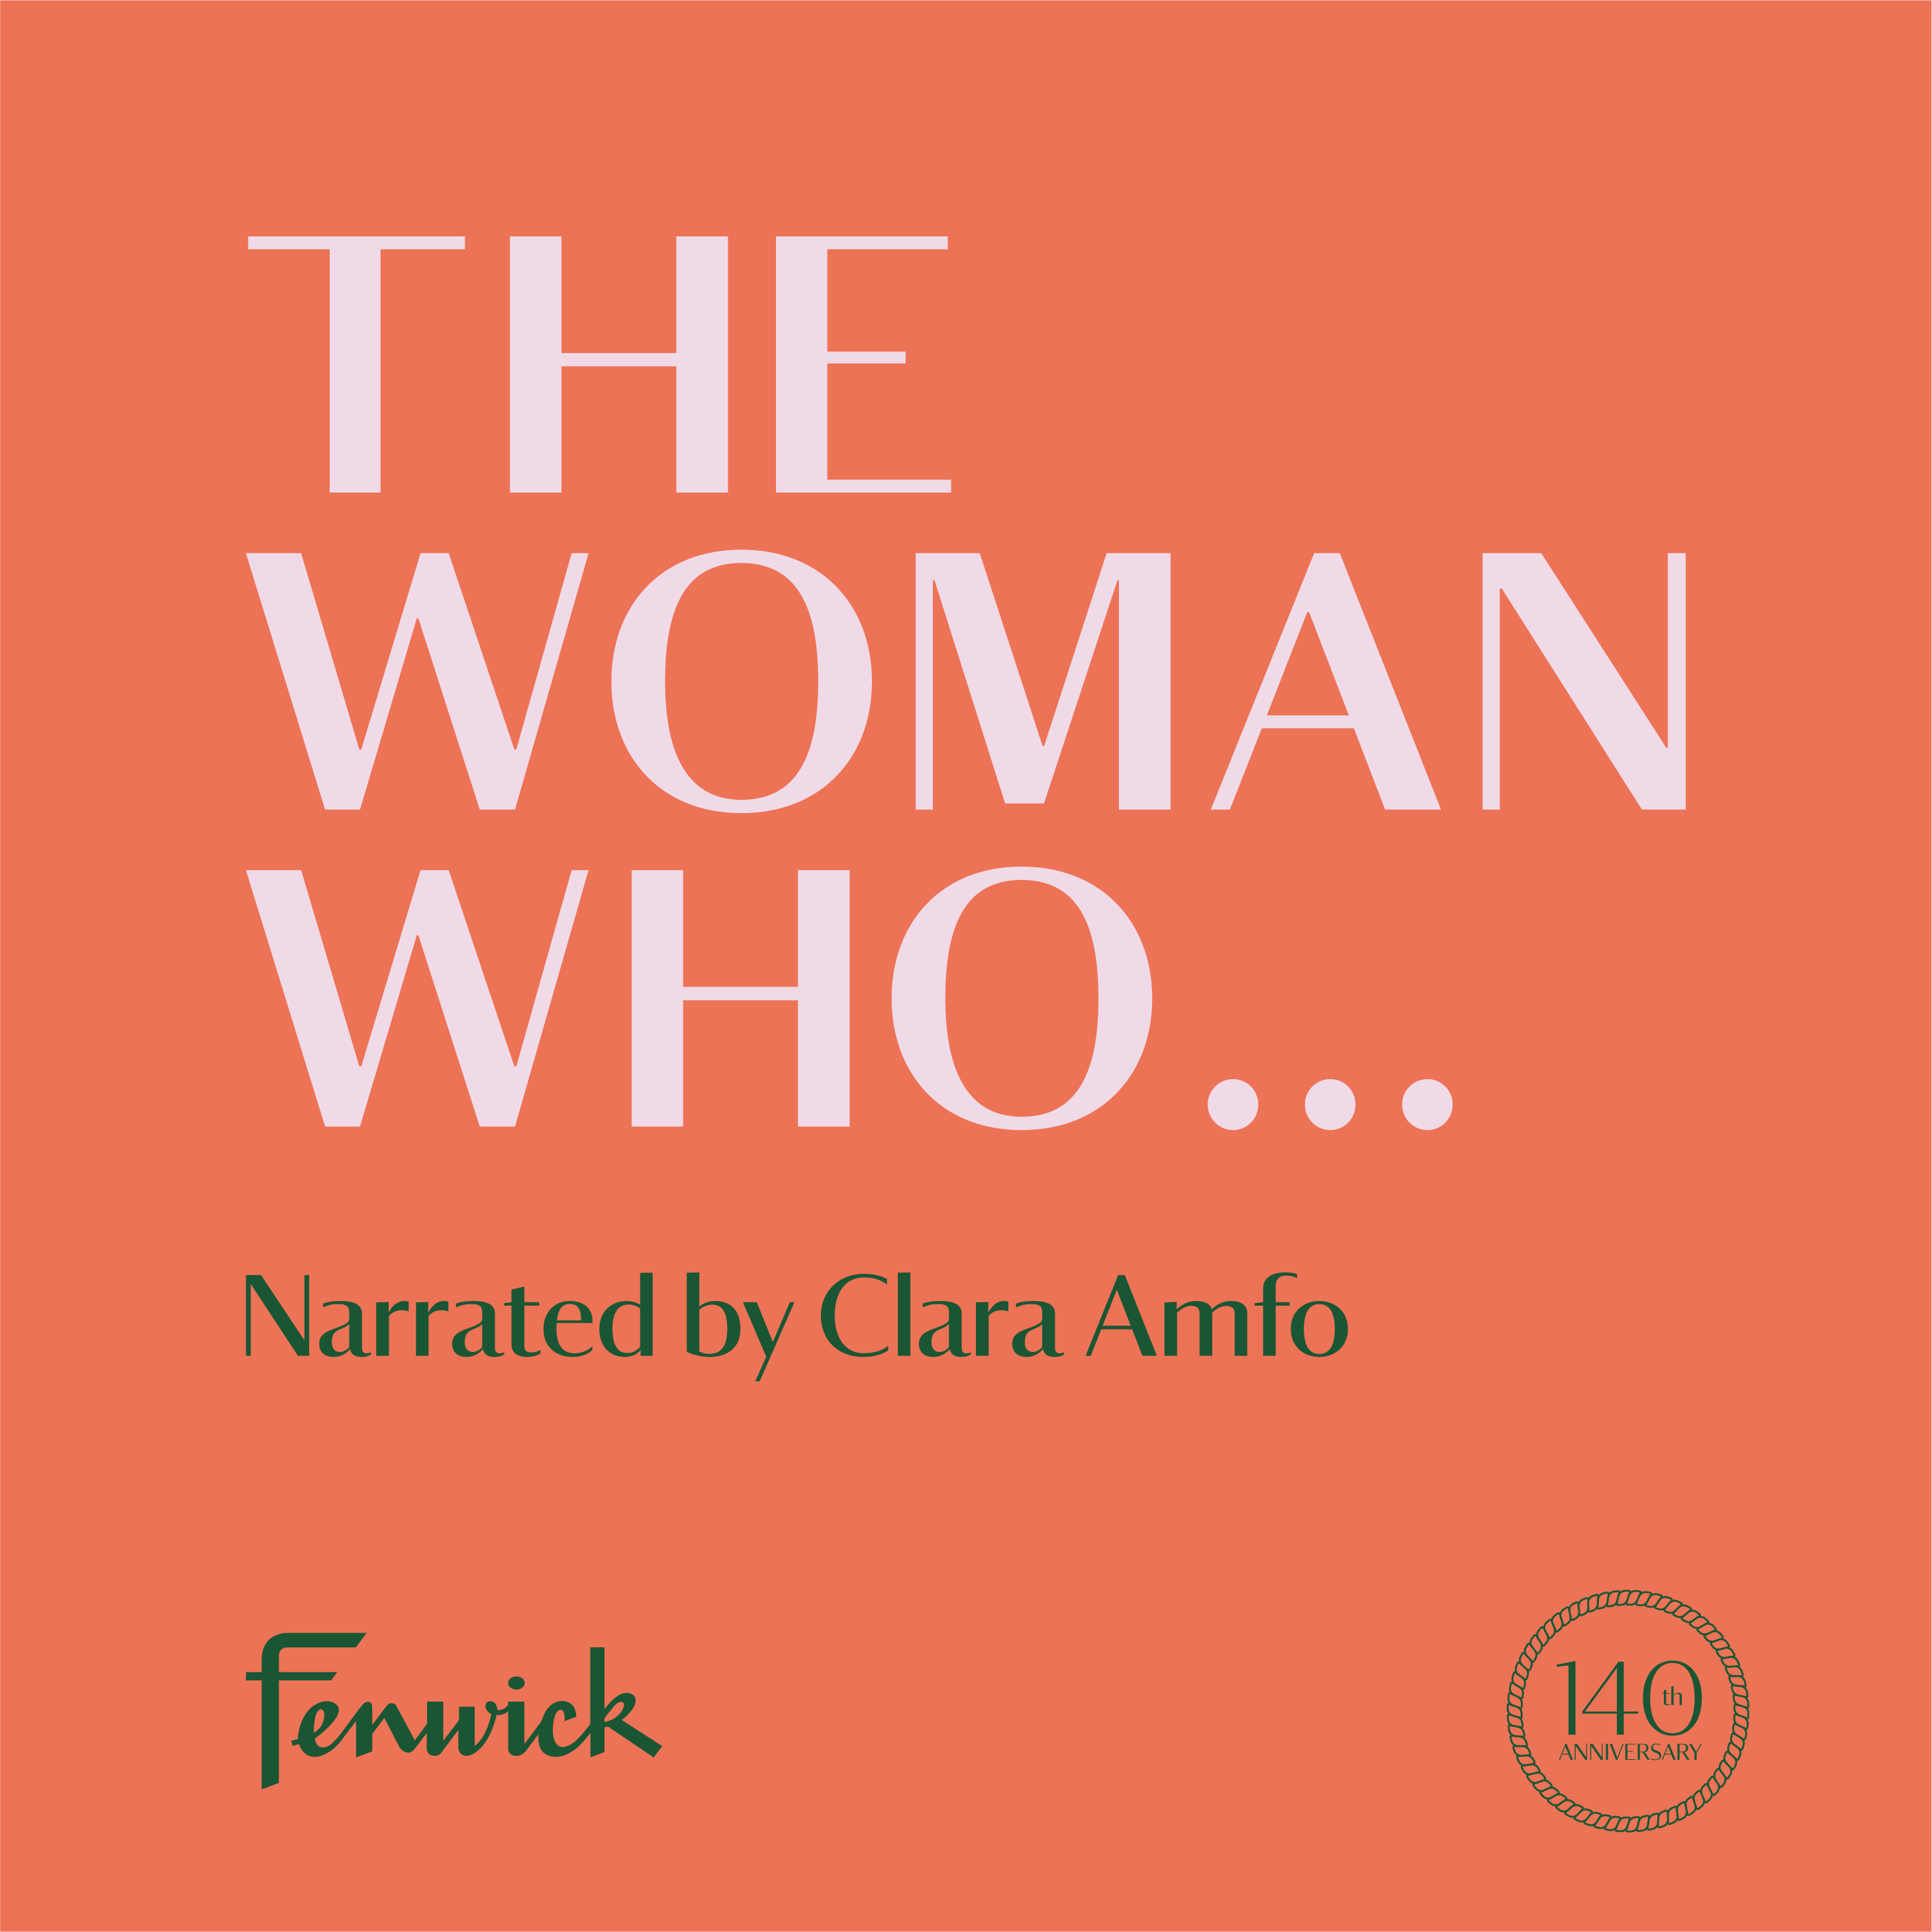 The Woman Who…